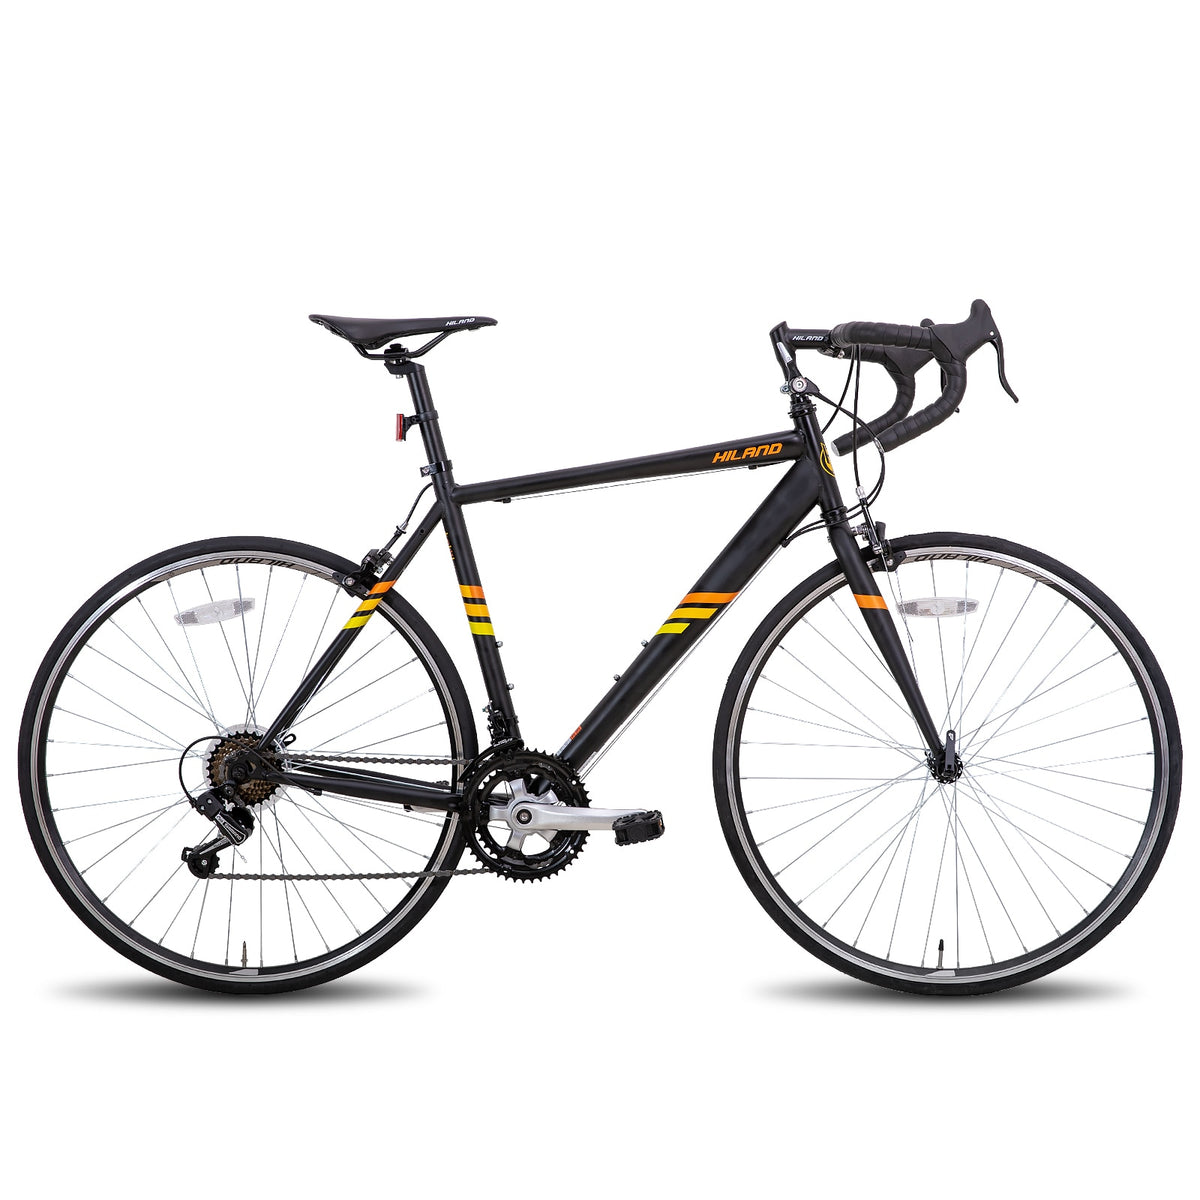 Hiland Road Bike 700C Racing Bicycle with 14 Speeds 3 Colors 